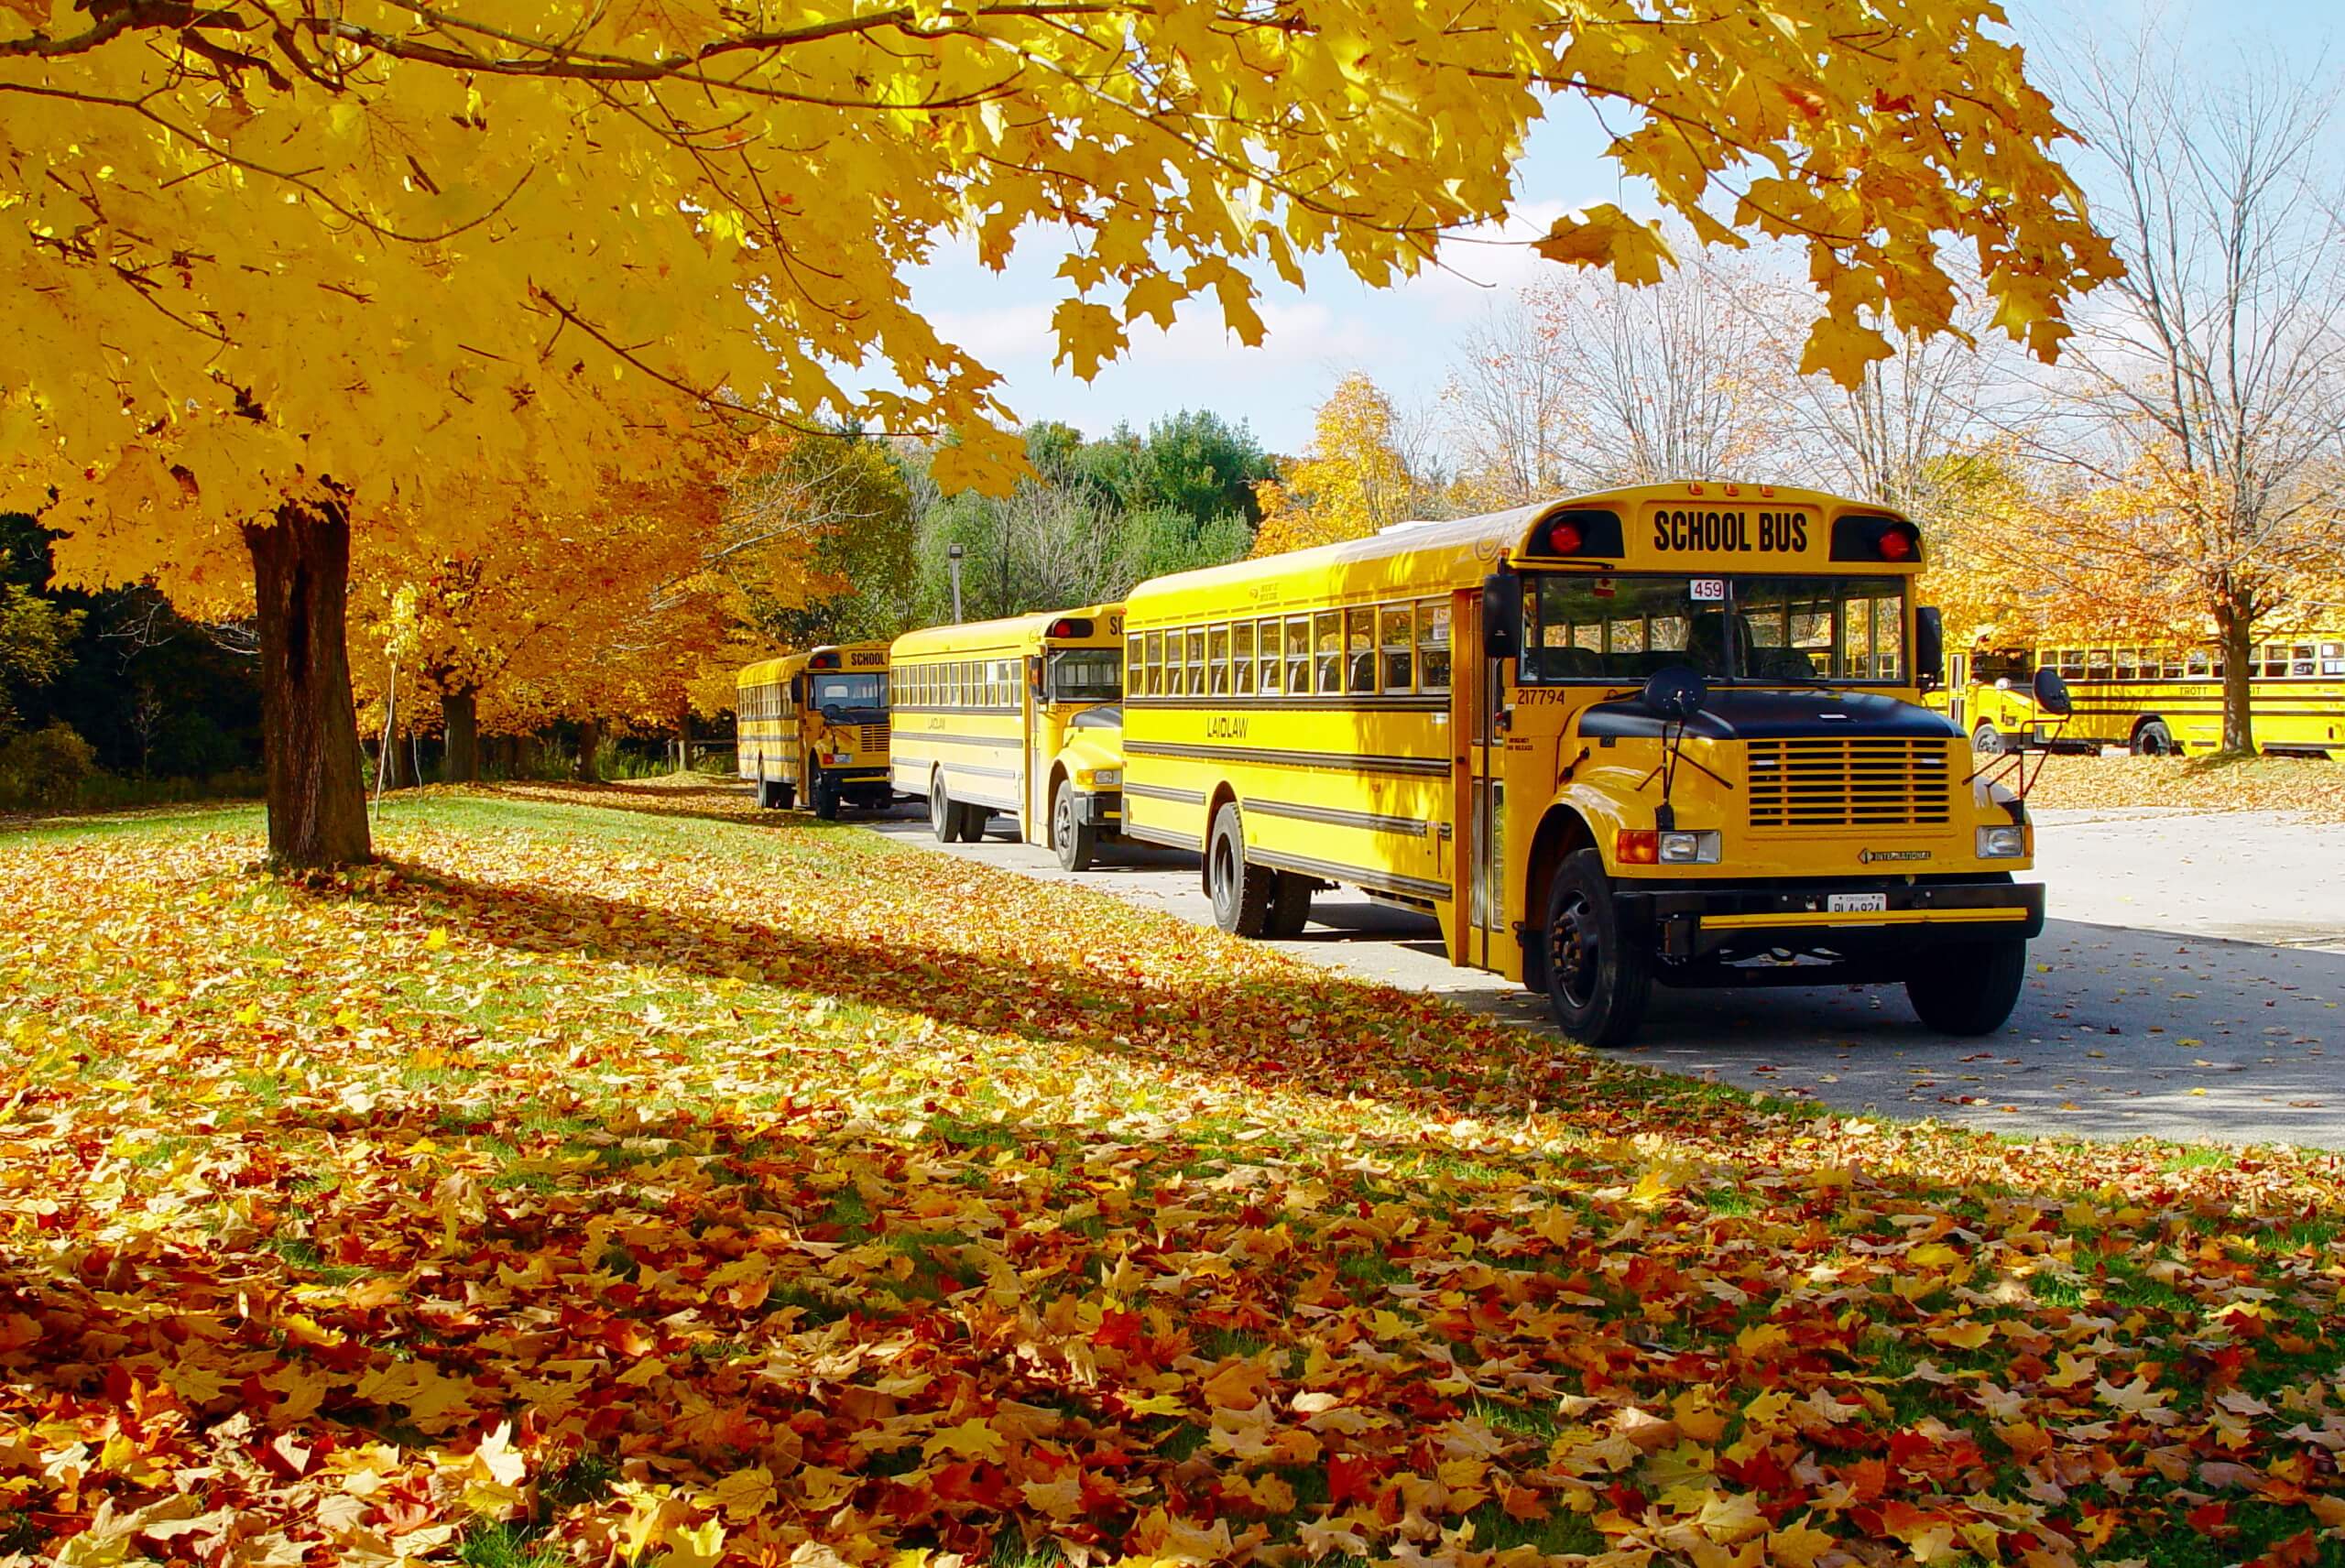 CPA shares AQP concerns regarding unwarranted removal of low-emission propane school buses in Quebec